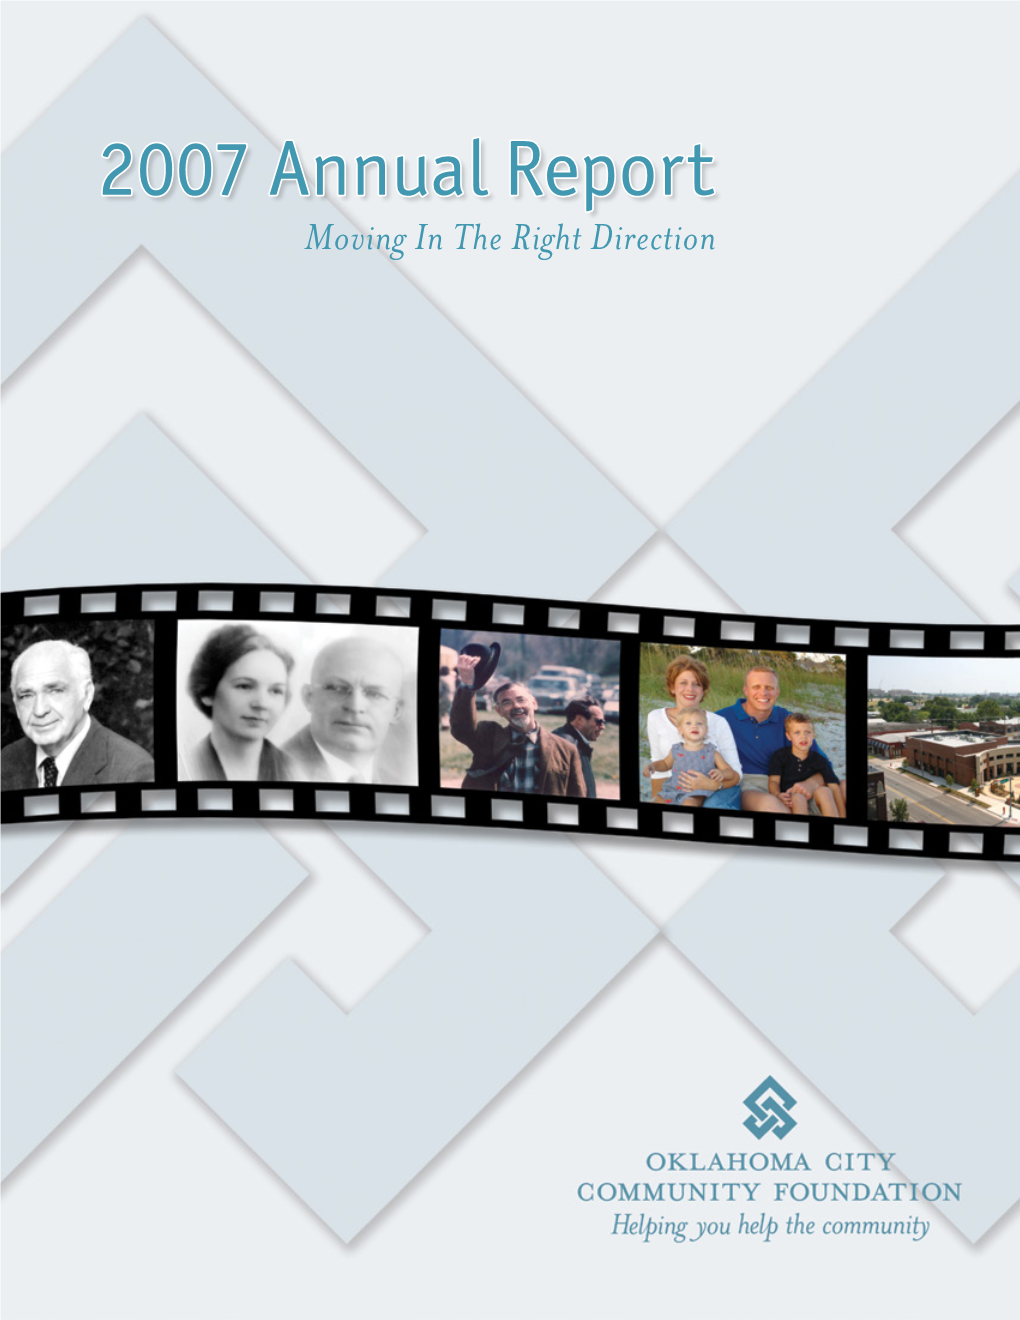 2007 Annual Report Moving in the Right Direction